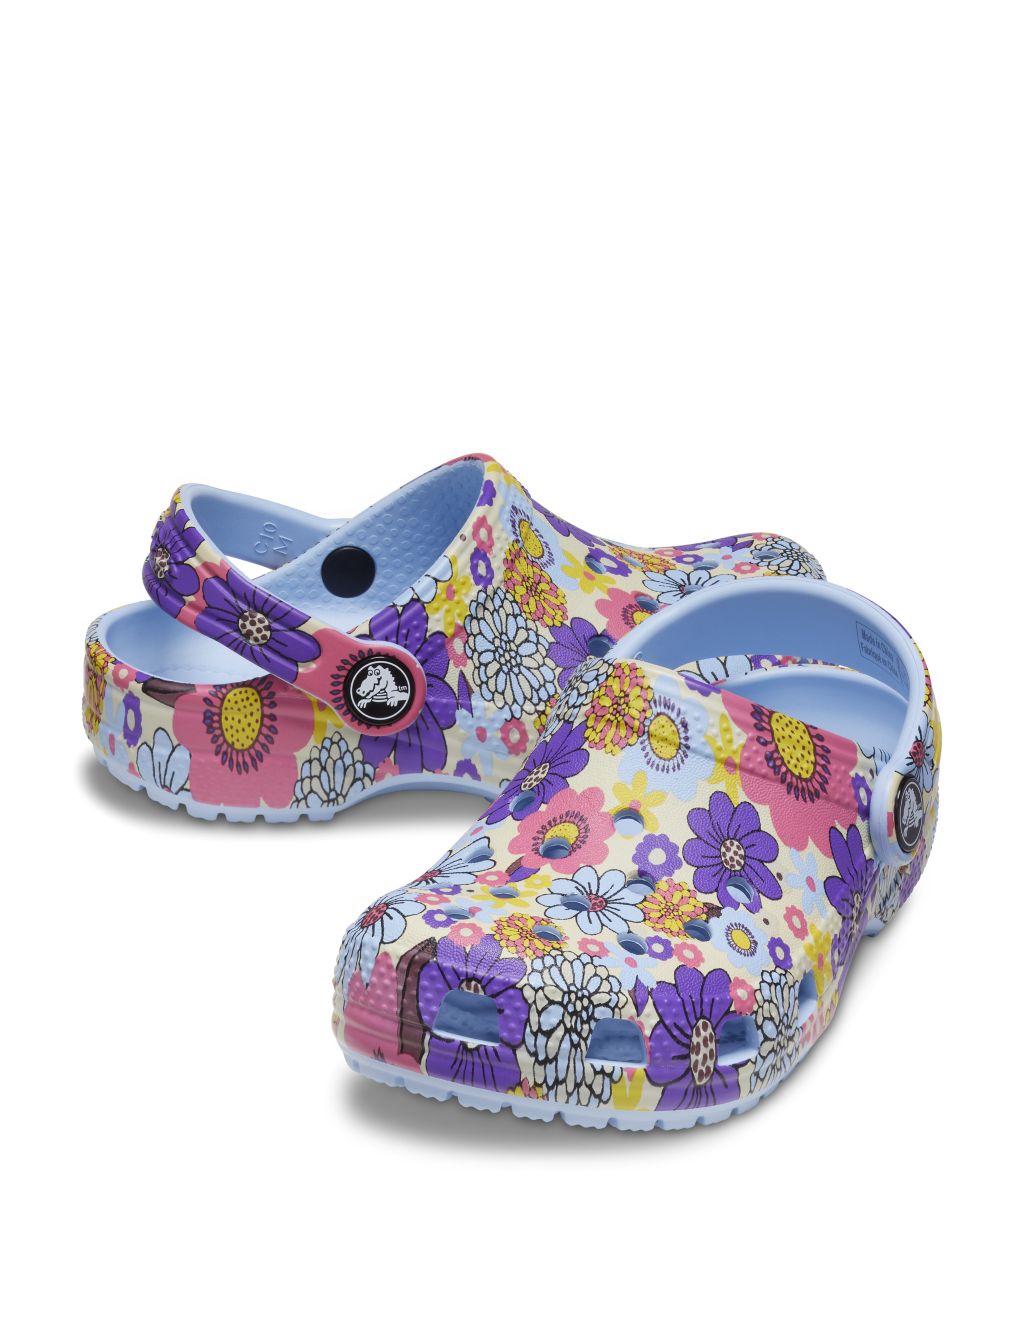 Kids' Classic Retro Floral Clogs (4 Small - 10 Small) image 3